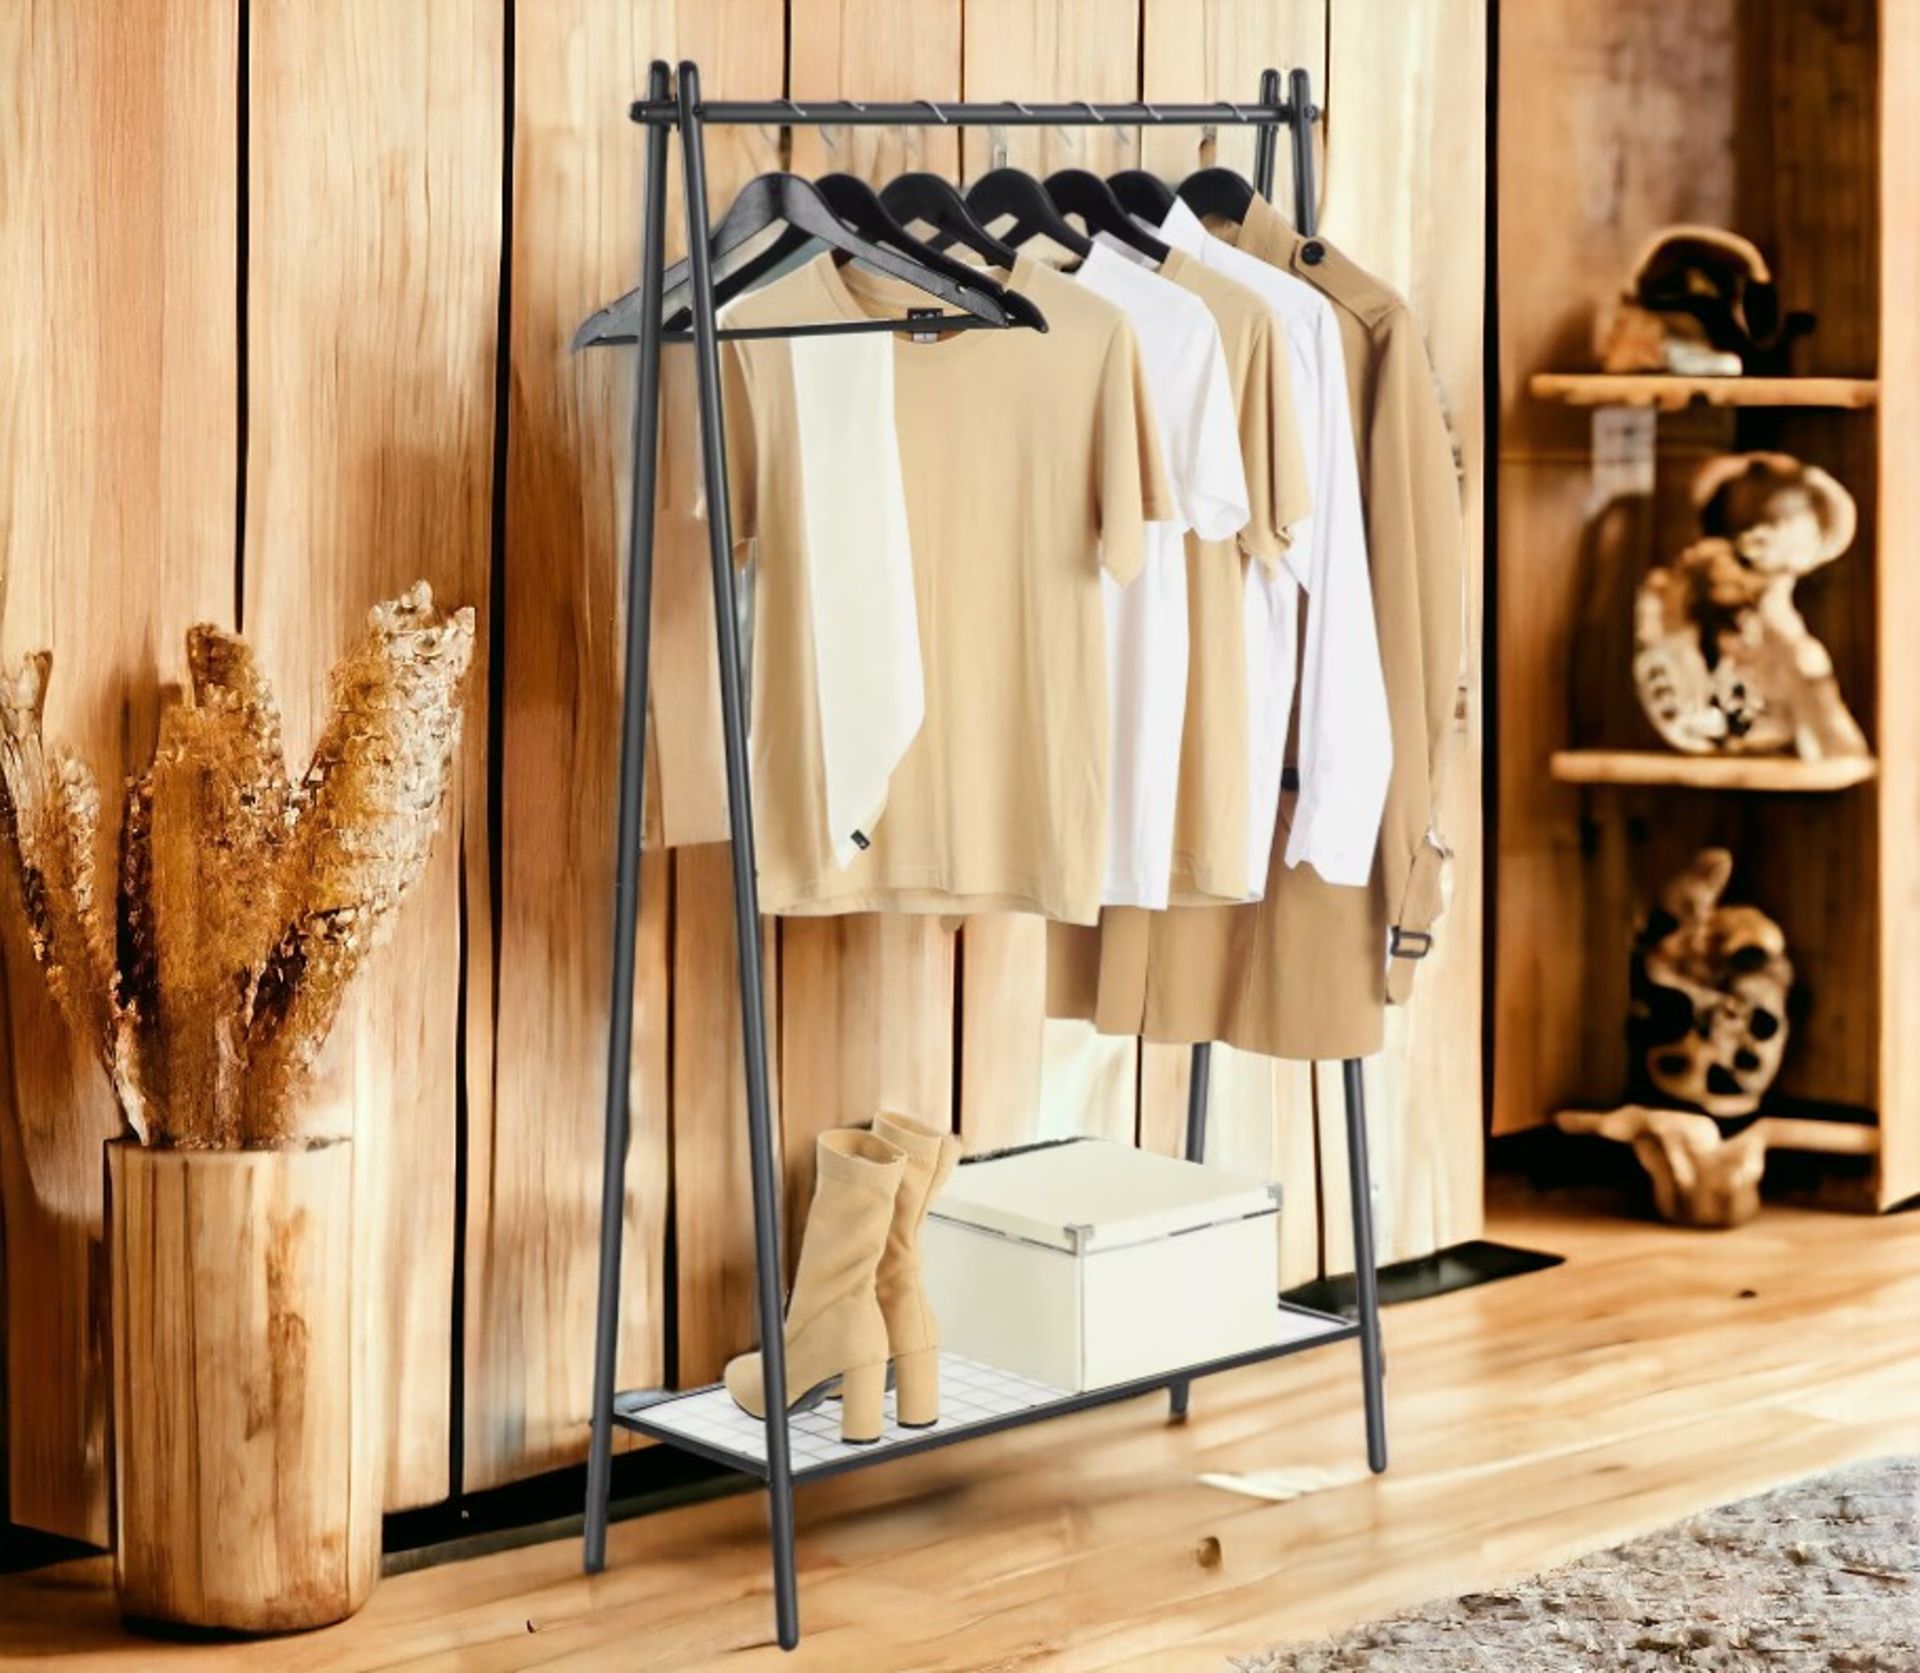 FREE DELIVERY - BRAND NEW CLOTHES RACK WITH STEEL STRUCTURE,92.5X33.5X153 CM